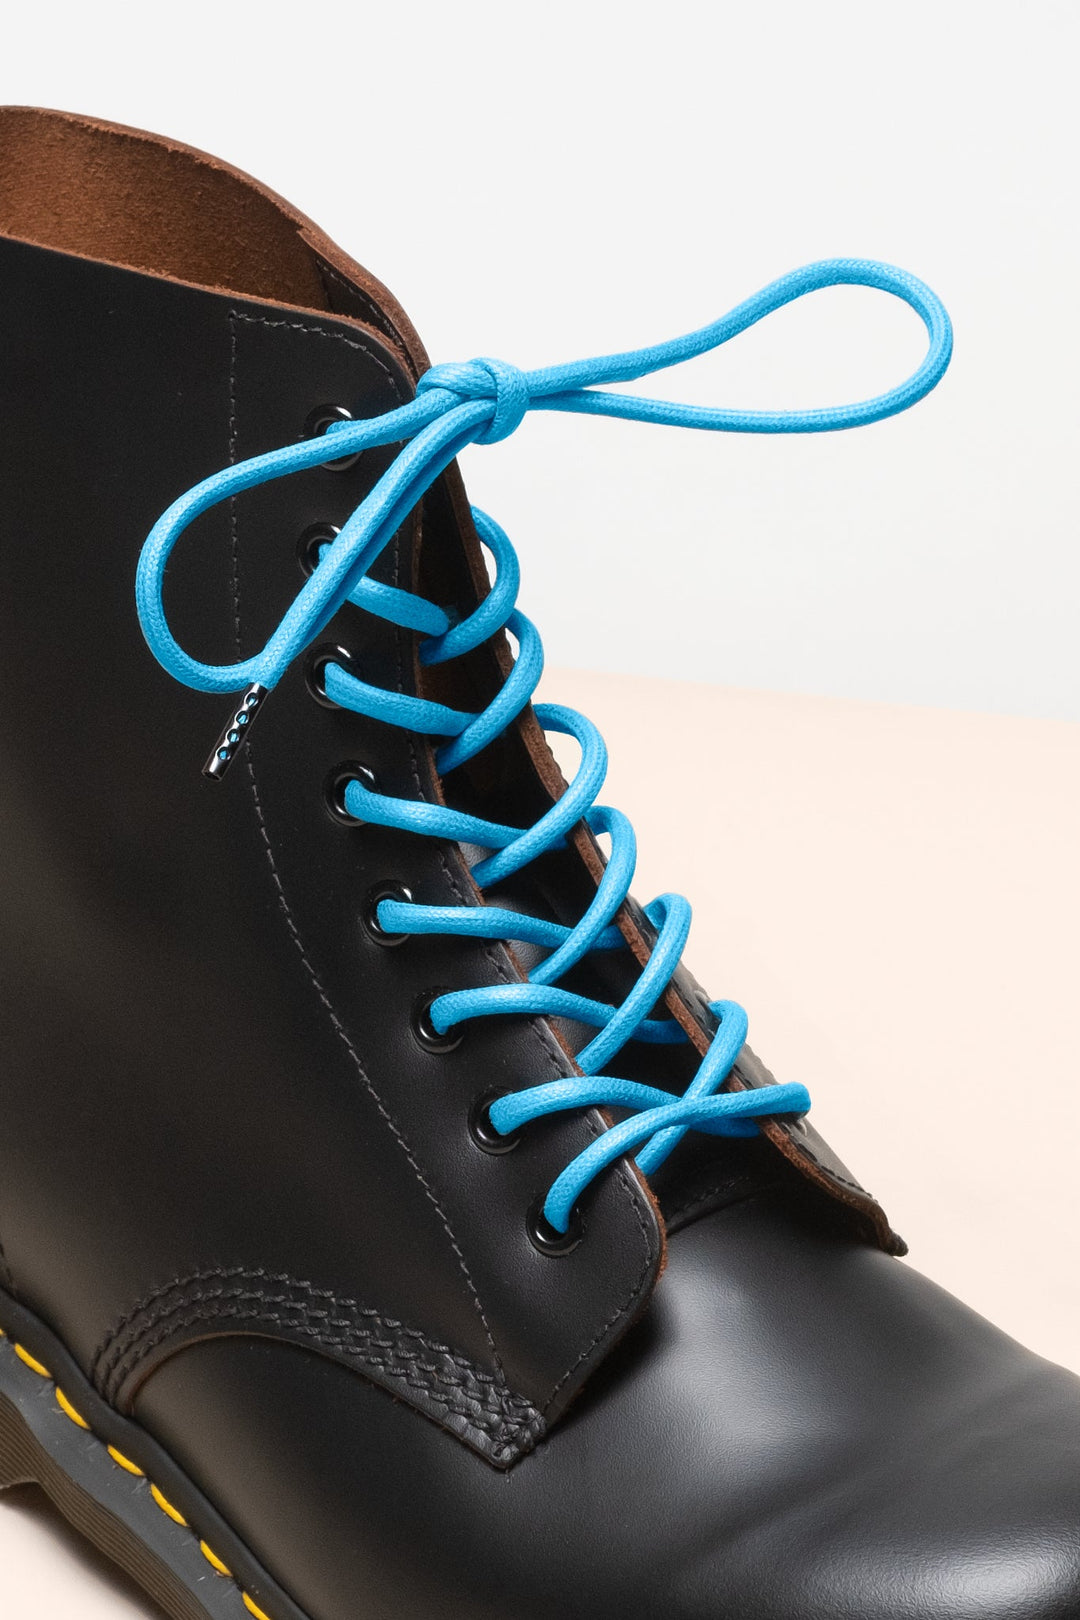 Petrol Blue - 4mm round waxed shoelaces for boots and shoes made from 100% organic cotton - Senkels